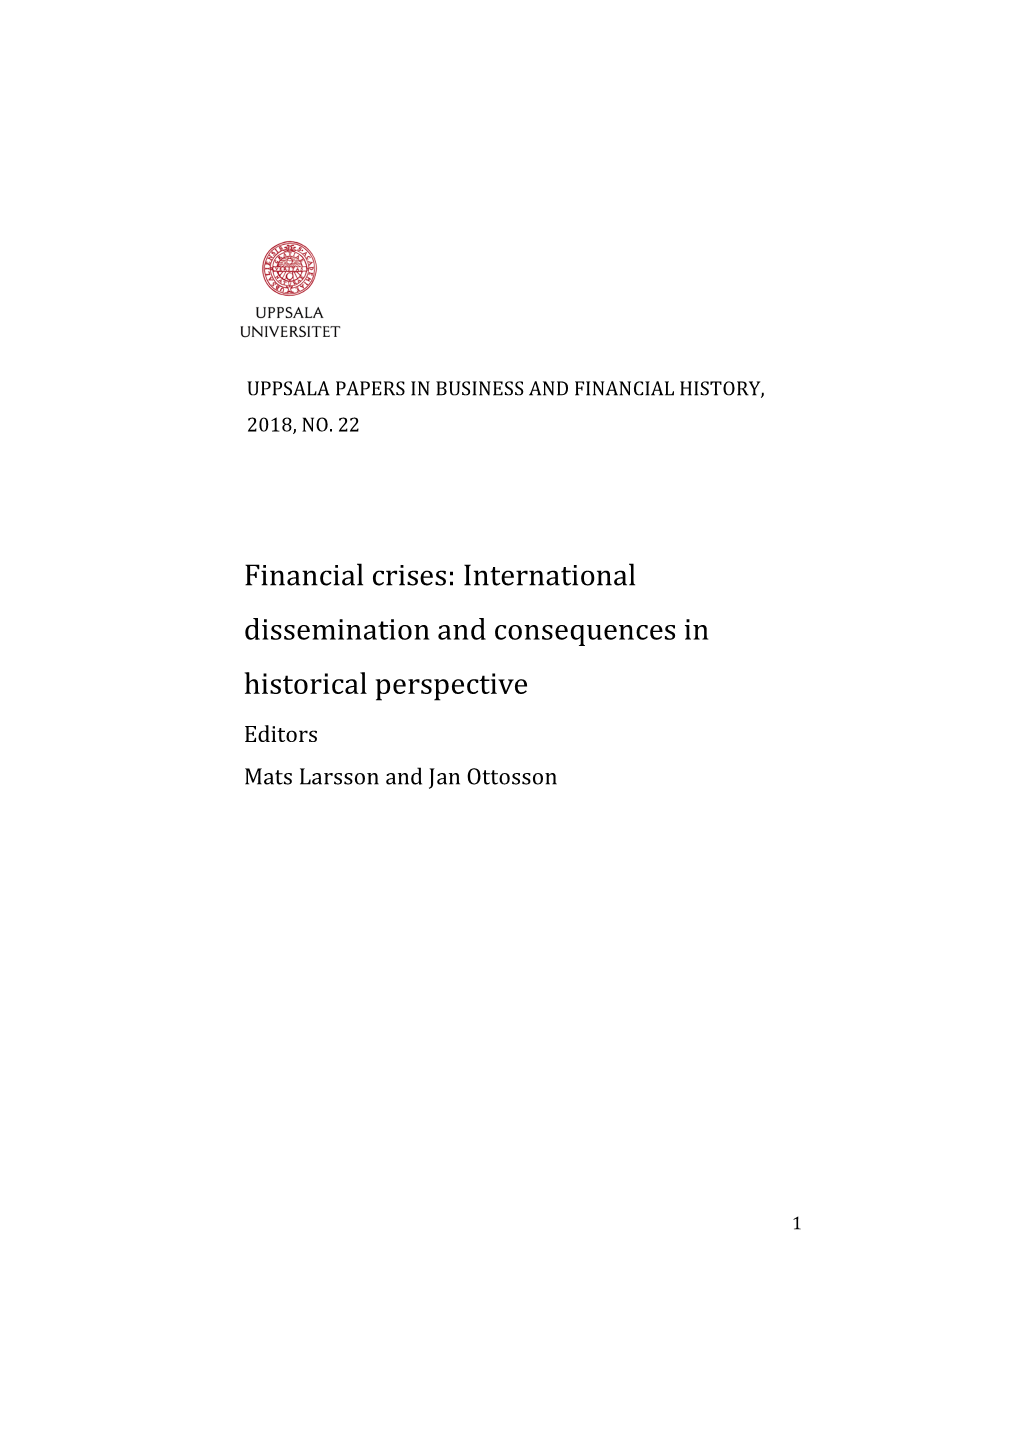 Financial Crises: International Dissemination and Consequences in Historical Perspective Editors Mats Larsson and Jan Ottosson